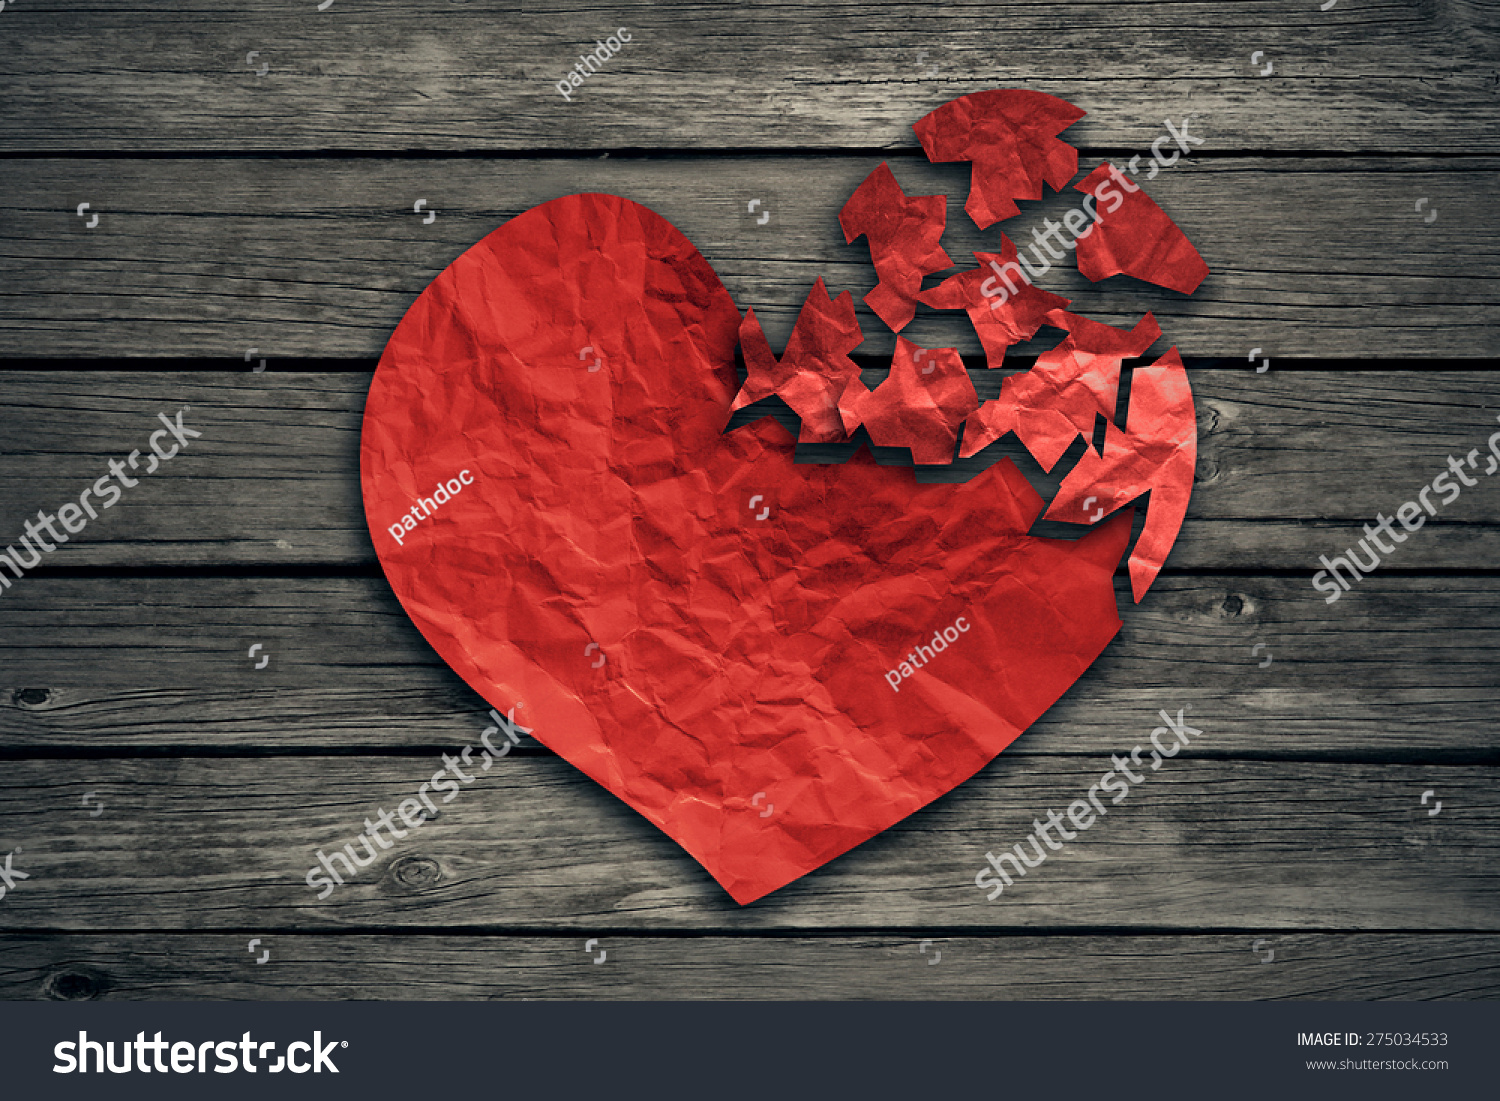 Broken heart breakup concept separation and divorce icon. Red crumpled paper shaped as a torn love on old wood symbol of medical cardiovascular health care problems due to illness #275034533